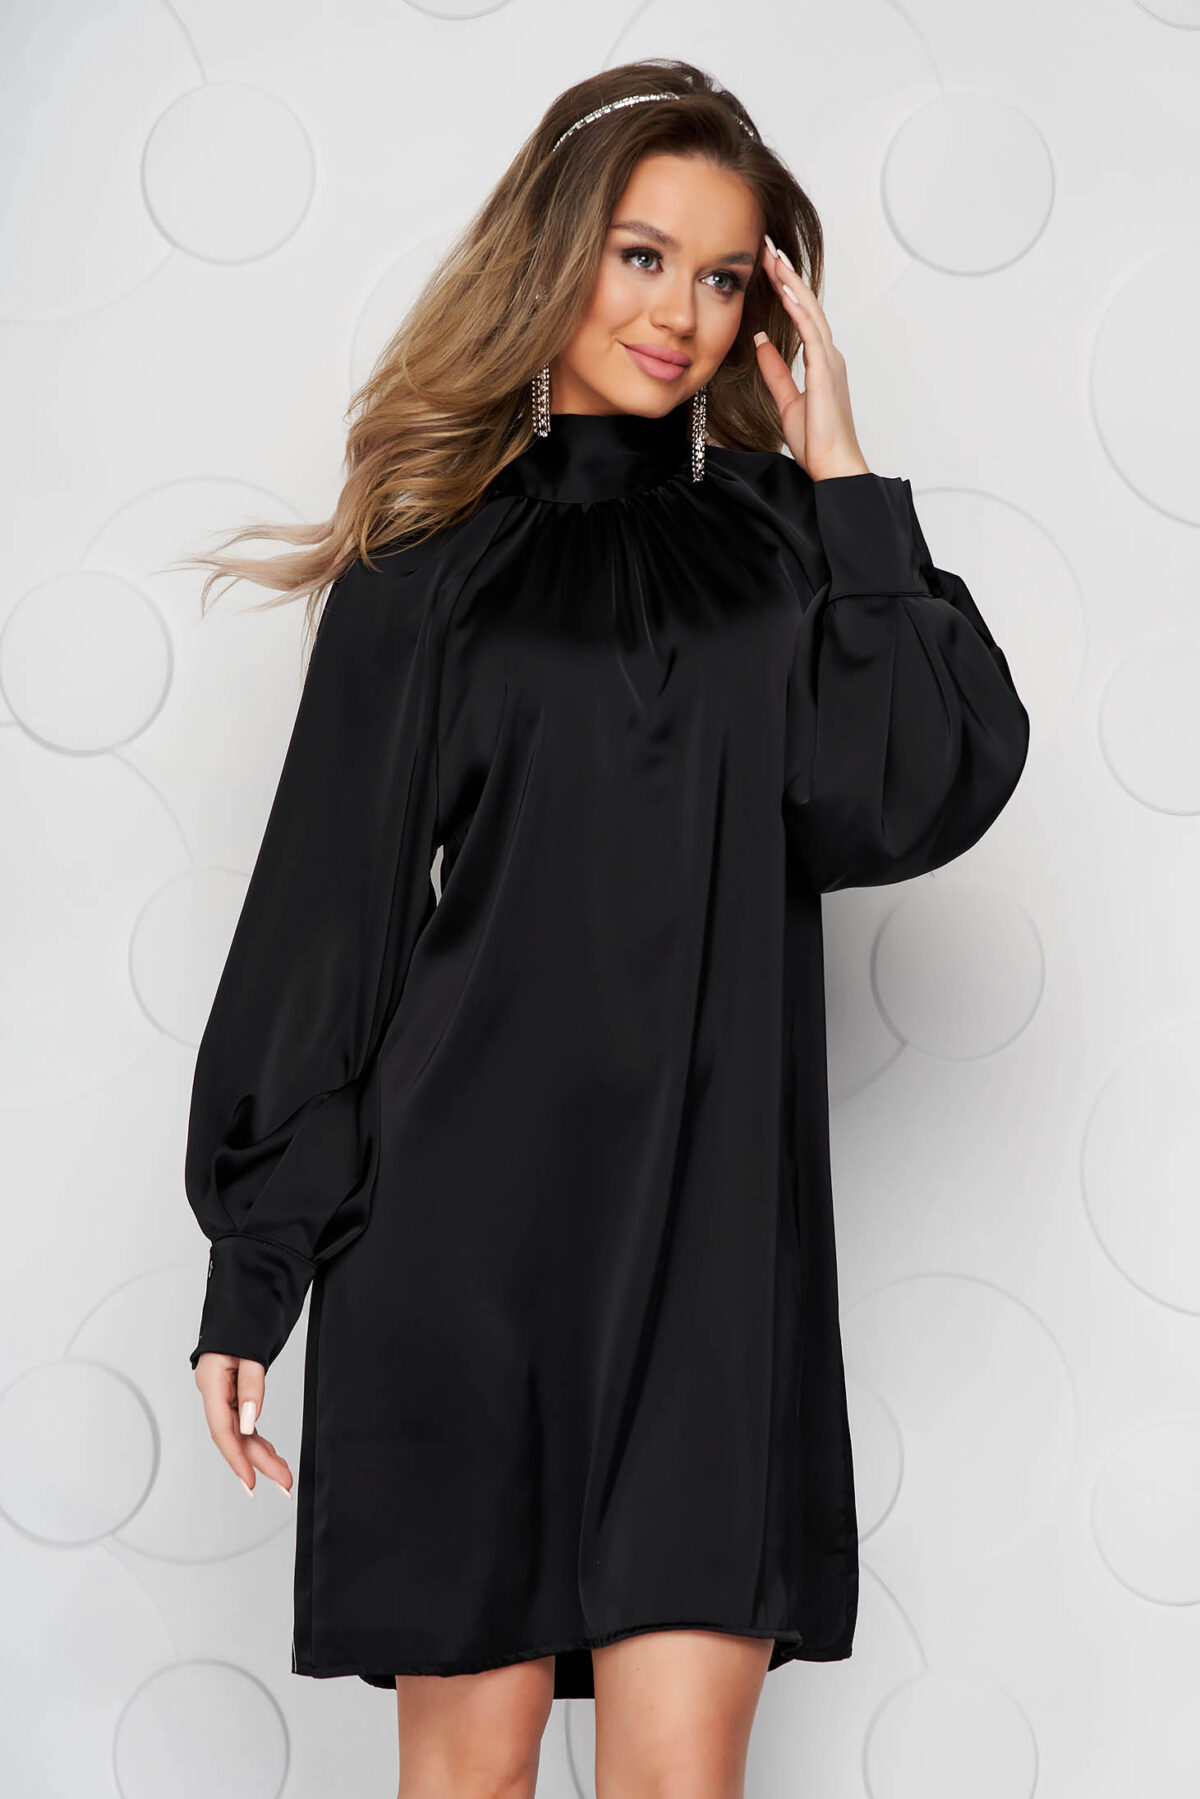 Black Dress From Satin With Puffed Sleeves Loose Fit Bow Accessory